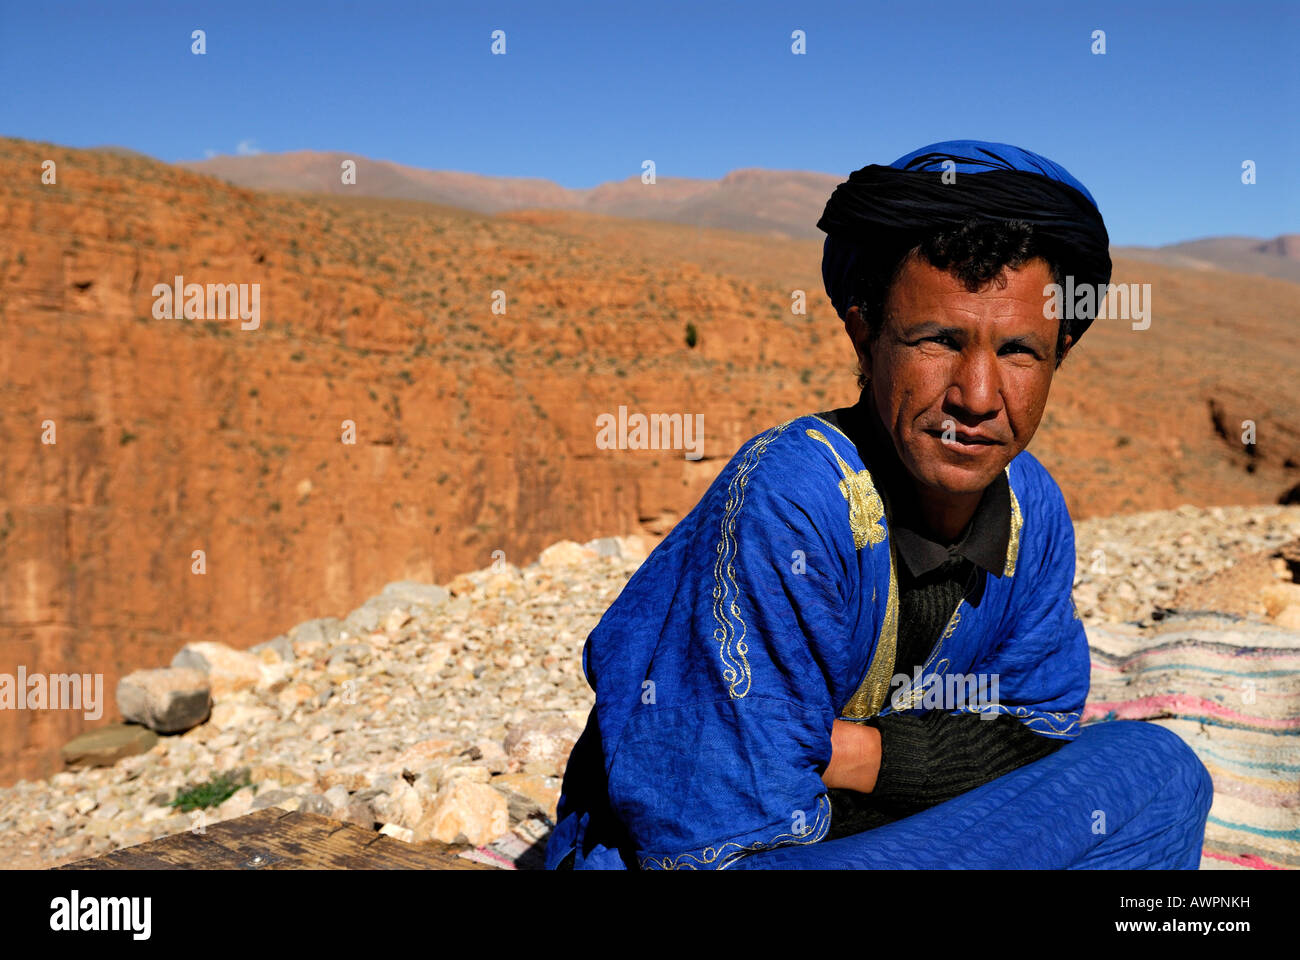 Moroccan dressed in blue sitting in front of red rocks, Dades Gorge, Quarzazate, Morocco, North Africa Stock Photo